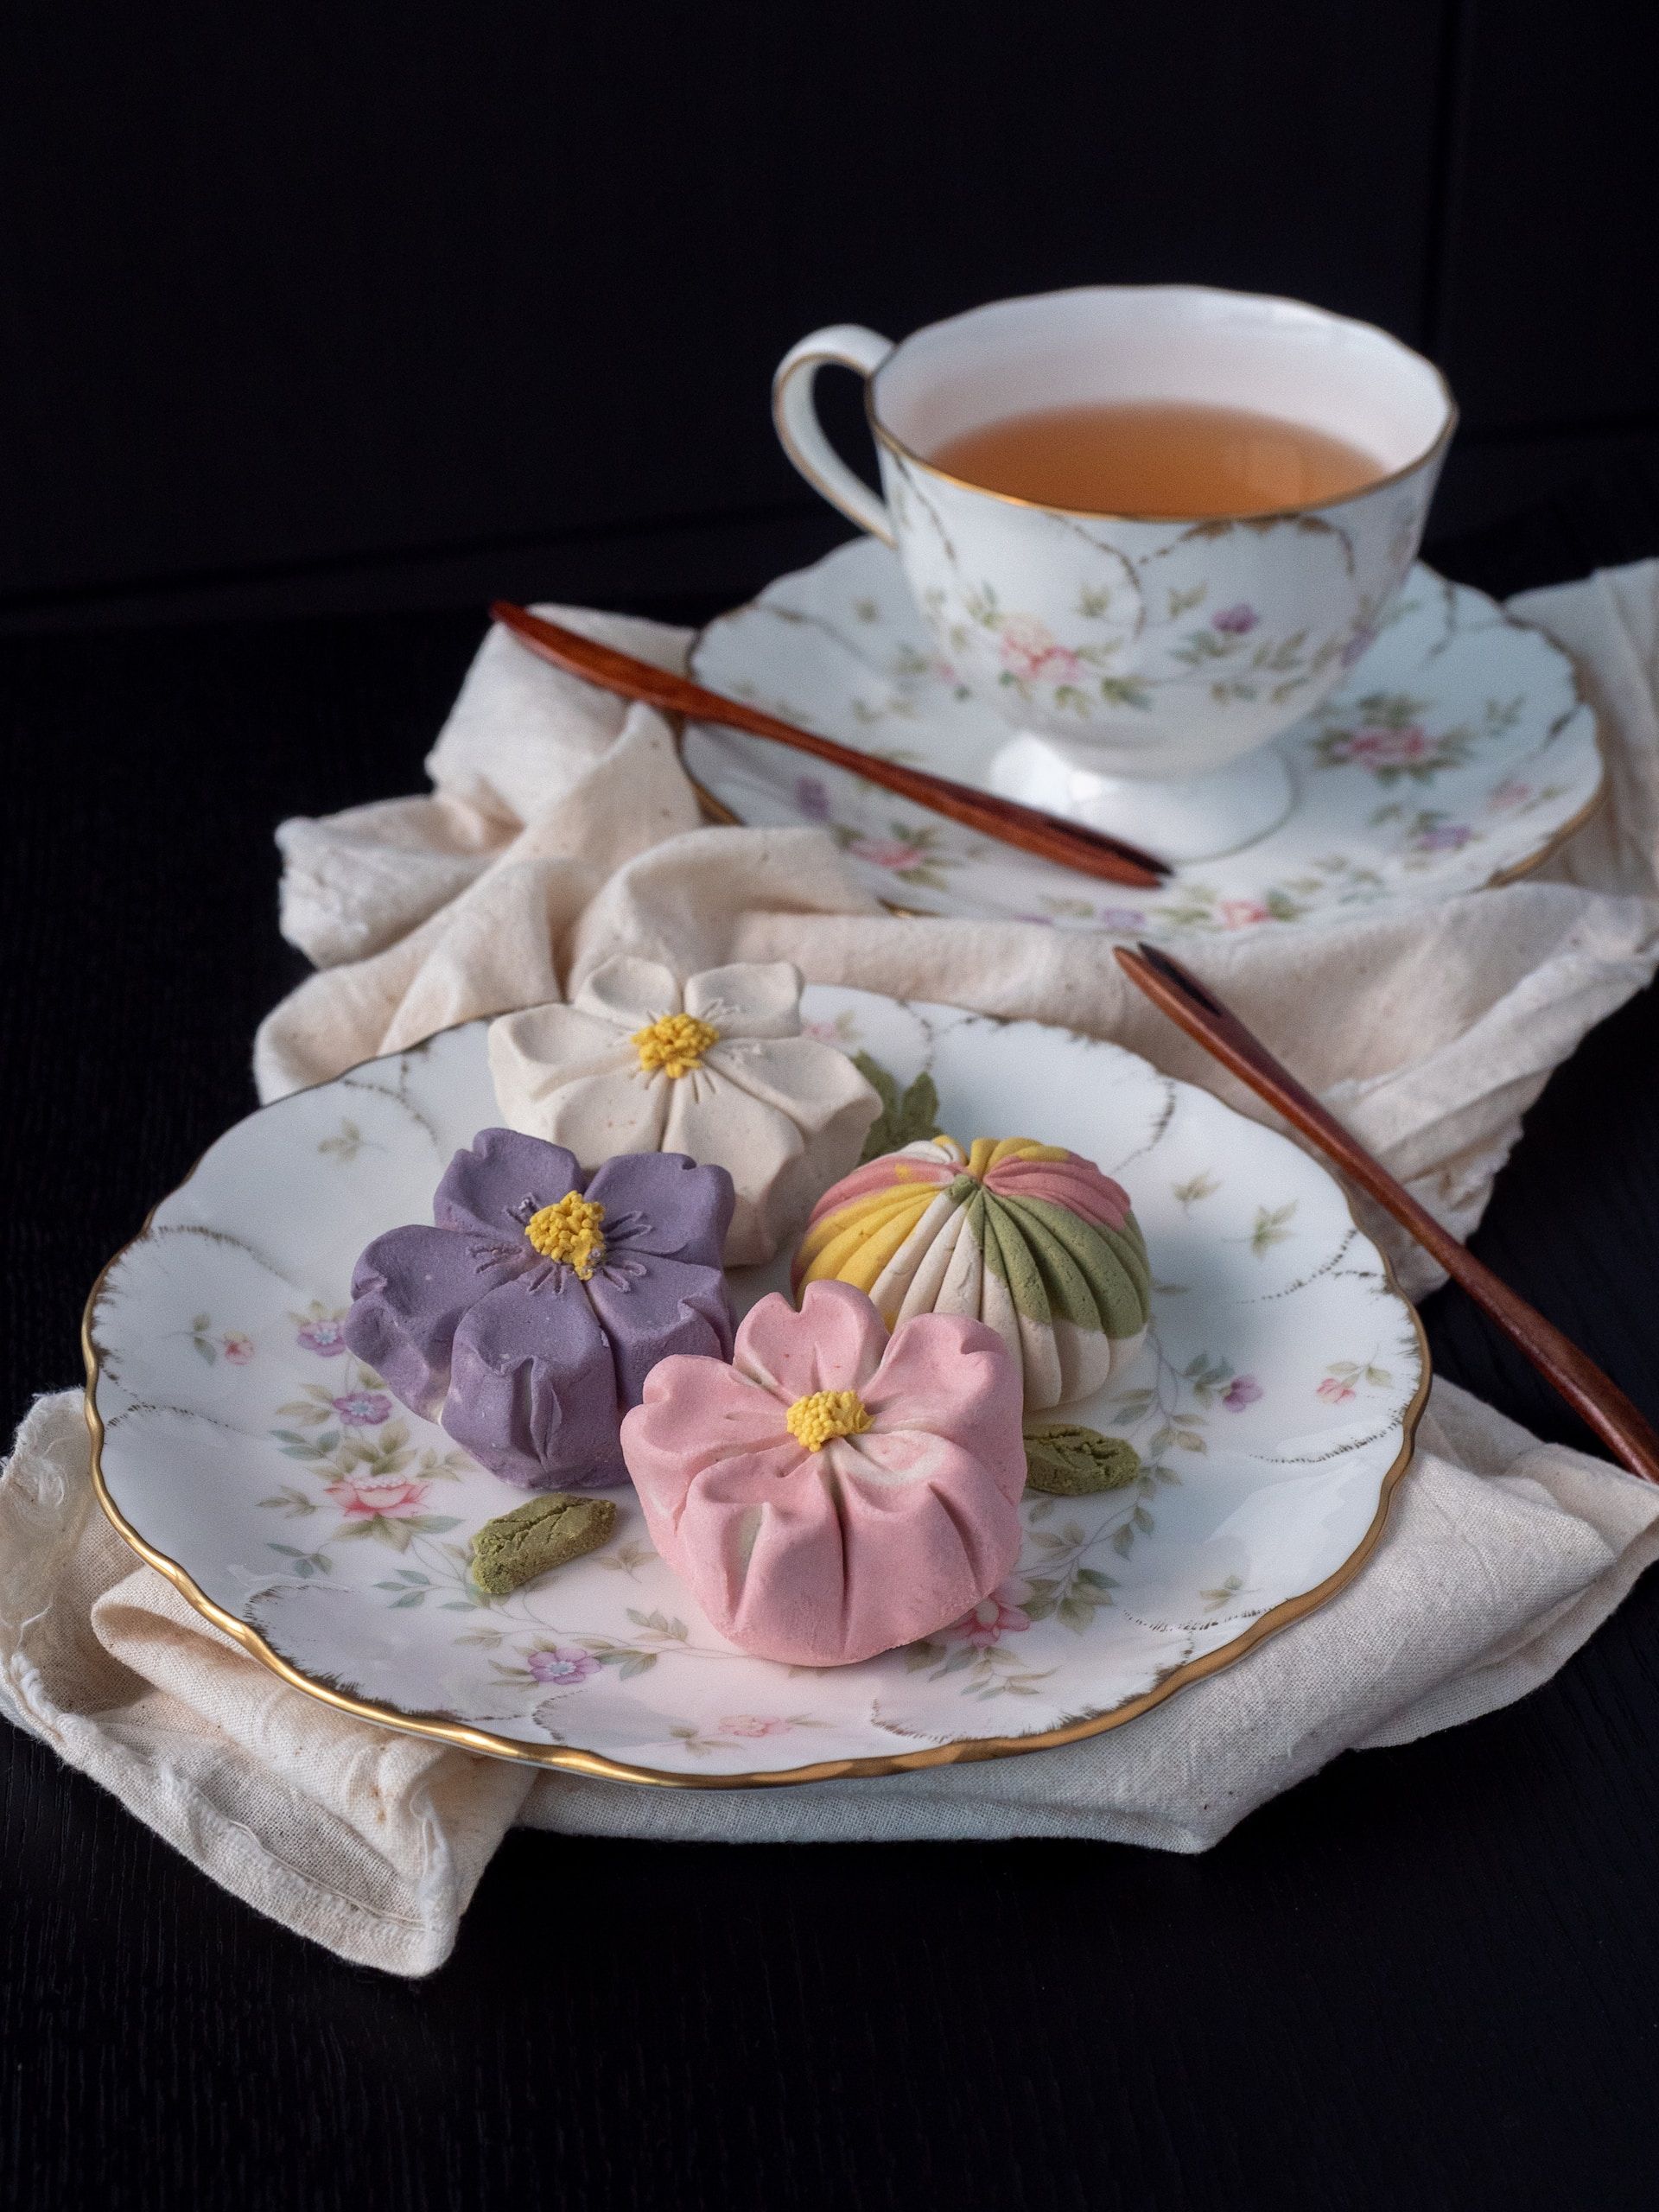 A plate of wagashi next to a cup of tea